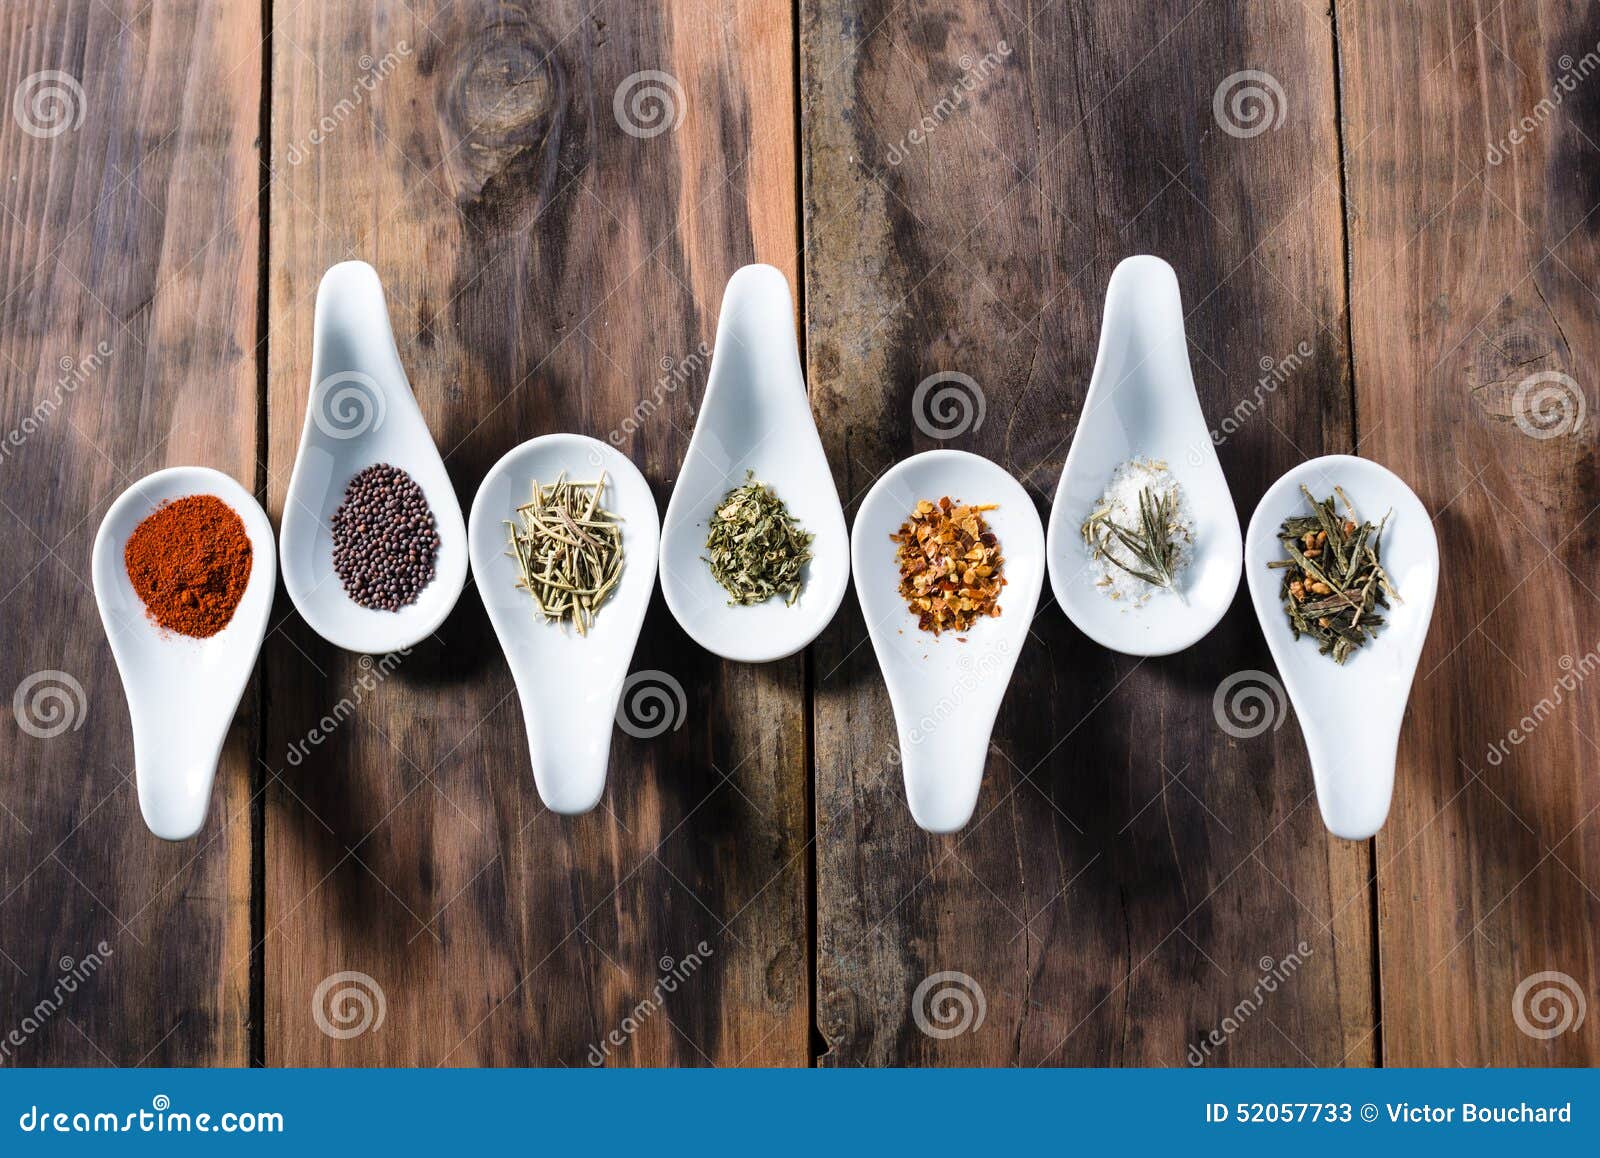 Cooking Spices Displayed in Tasting Spoons Stock Image - Image of ...